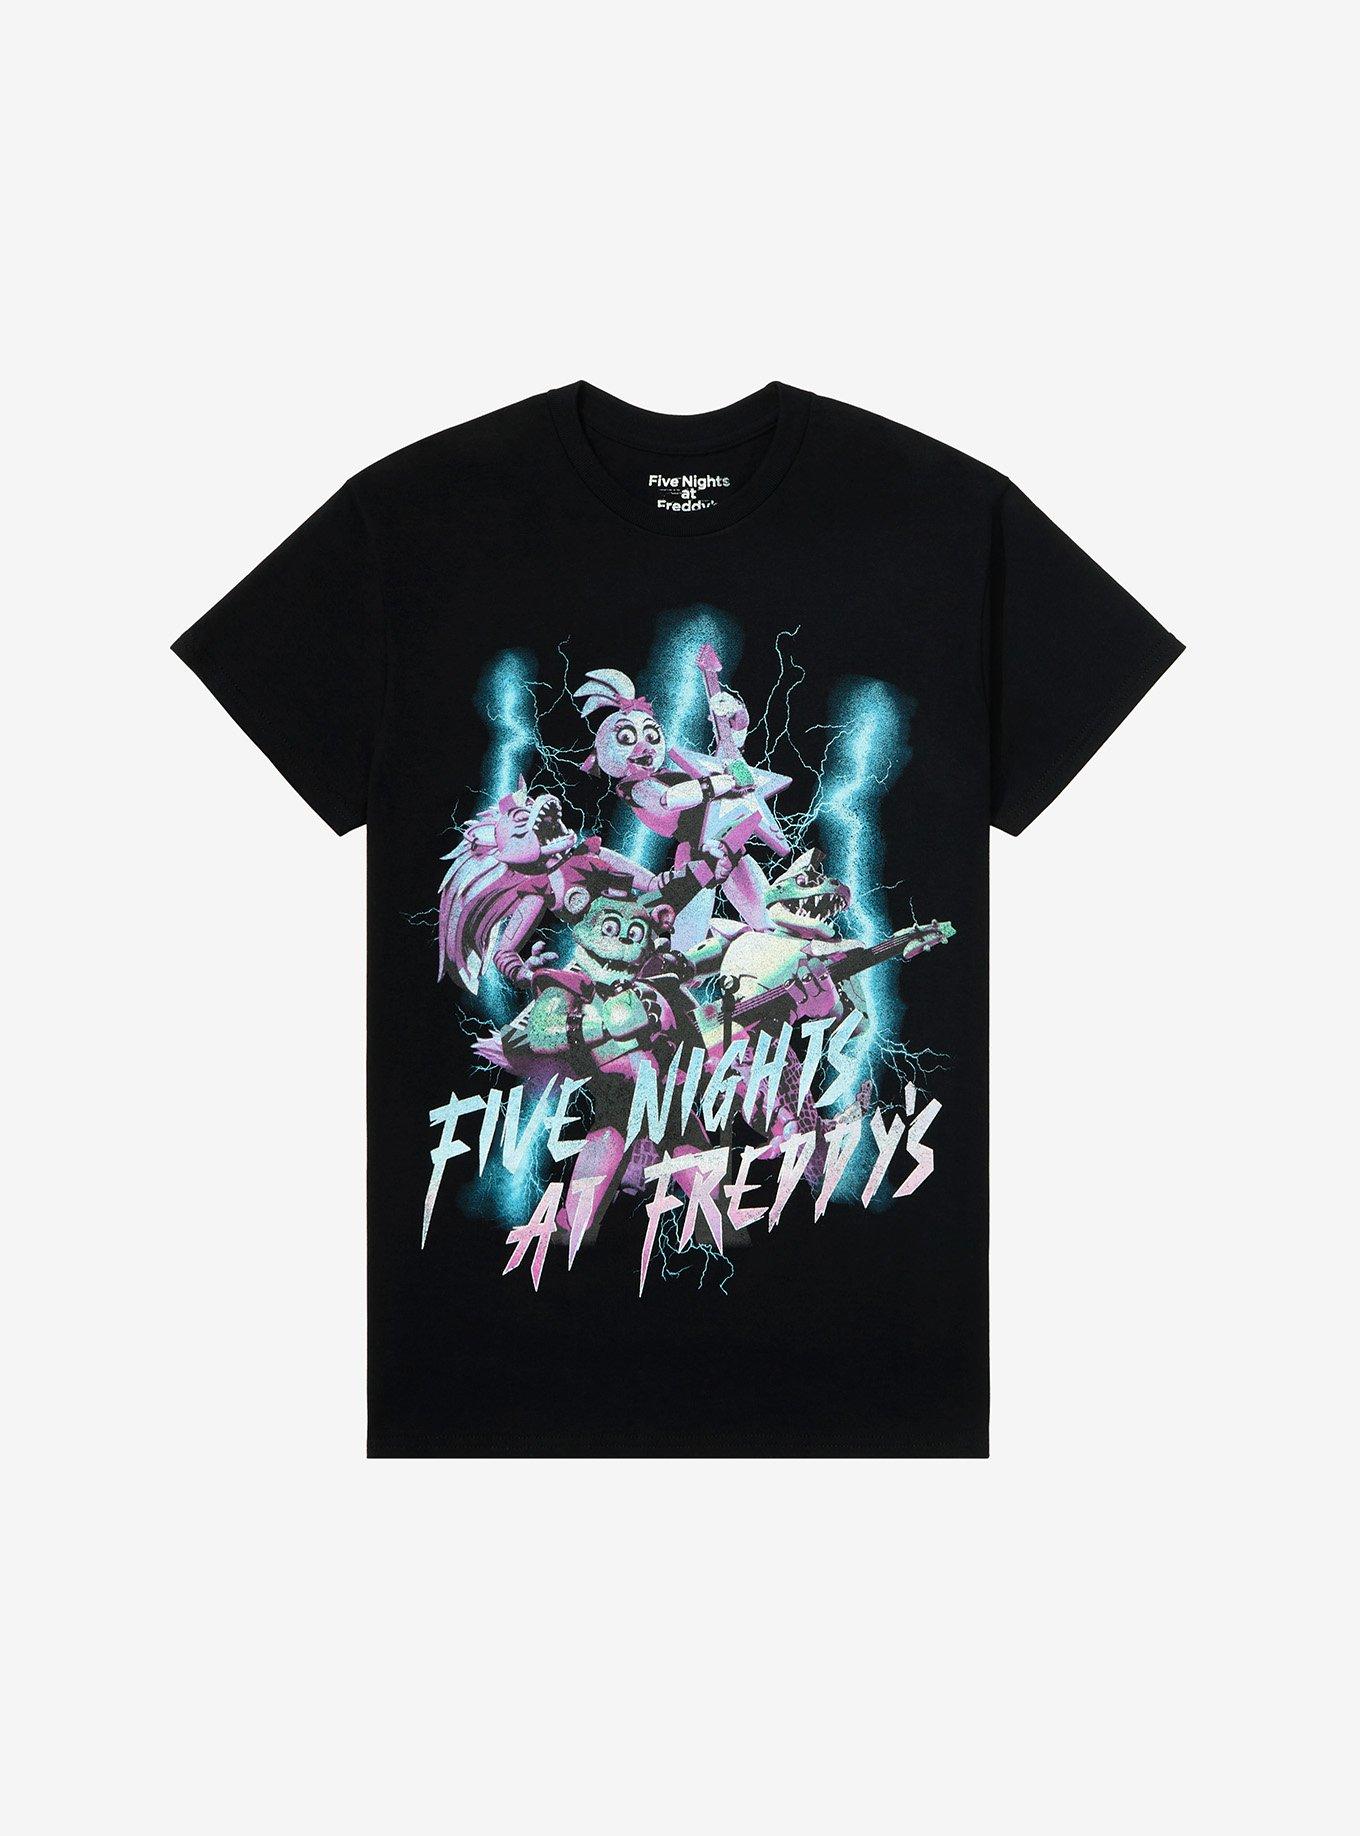 Five Nights At Freddy's: Security Breach Glow-In-The-Dark Lightning T-Shirt, BLACK, hi-res